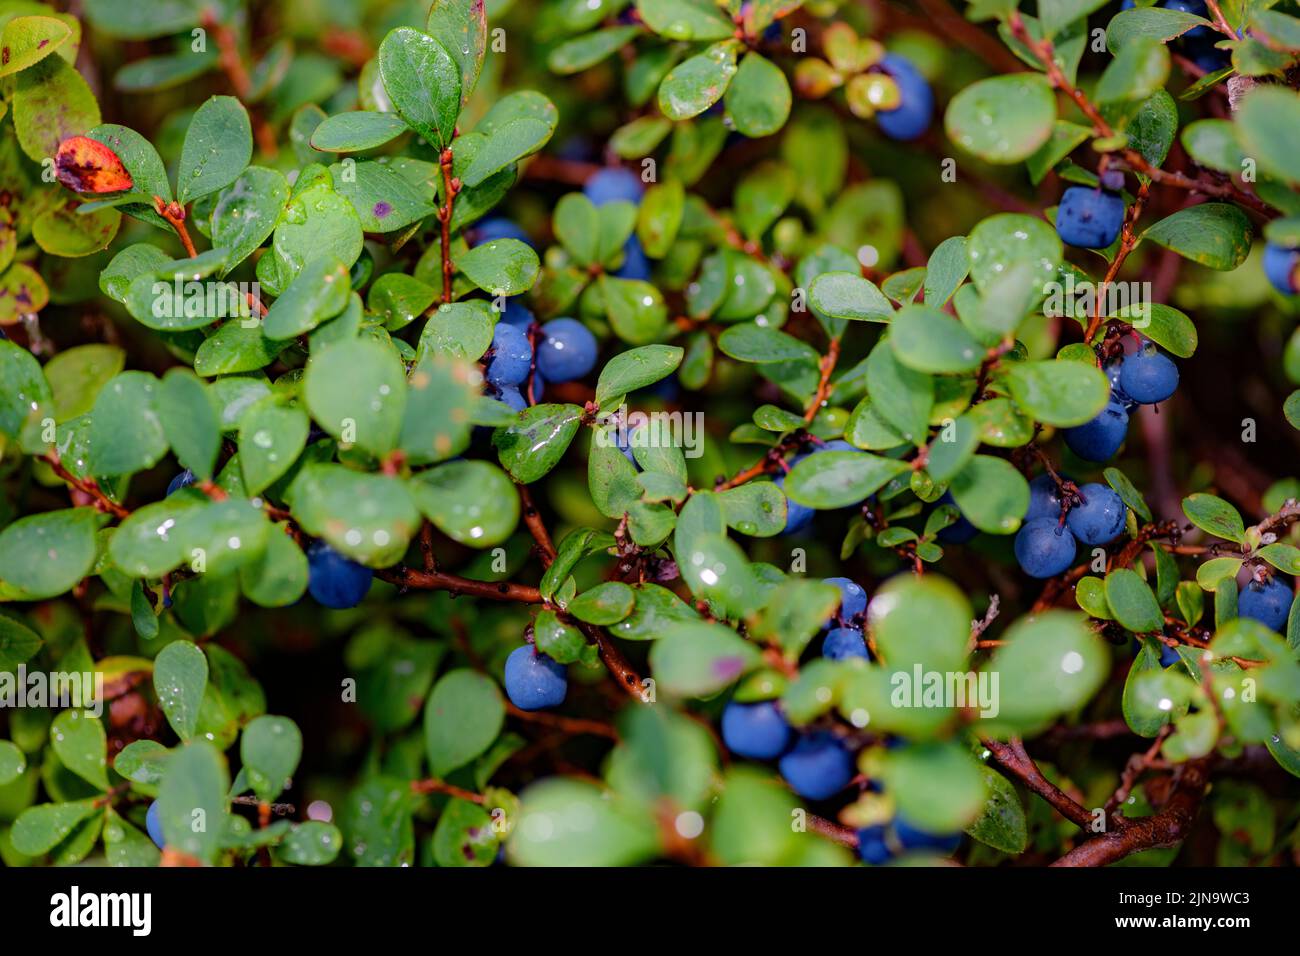 European blueberries (Vaccinium myrtillus) from south-western Norway in August. Stock Photo